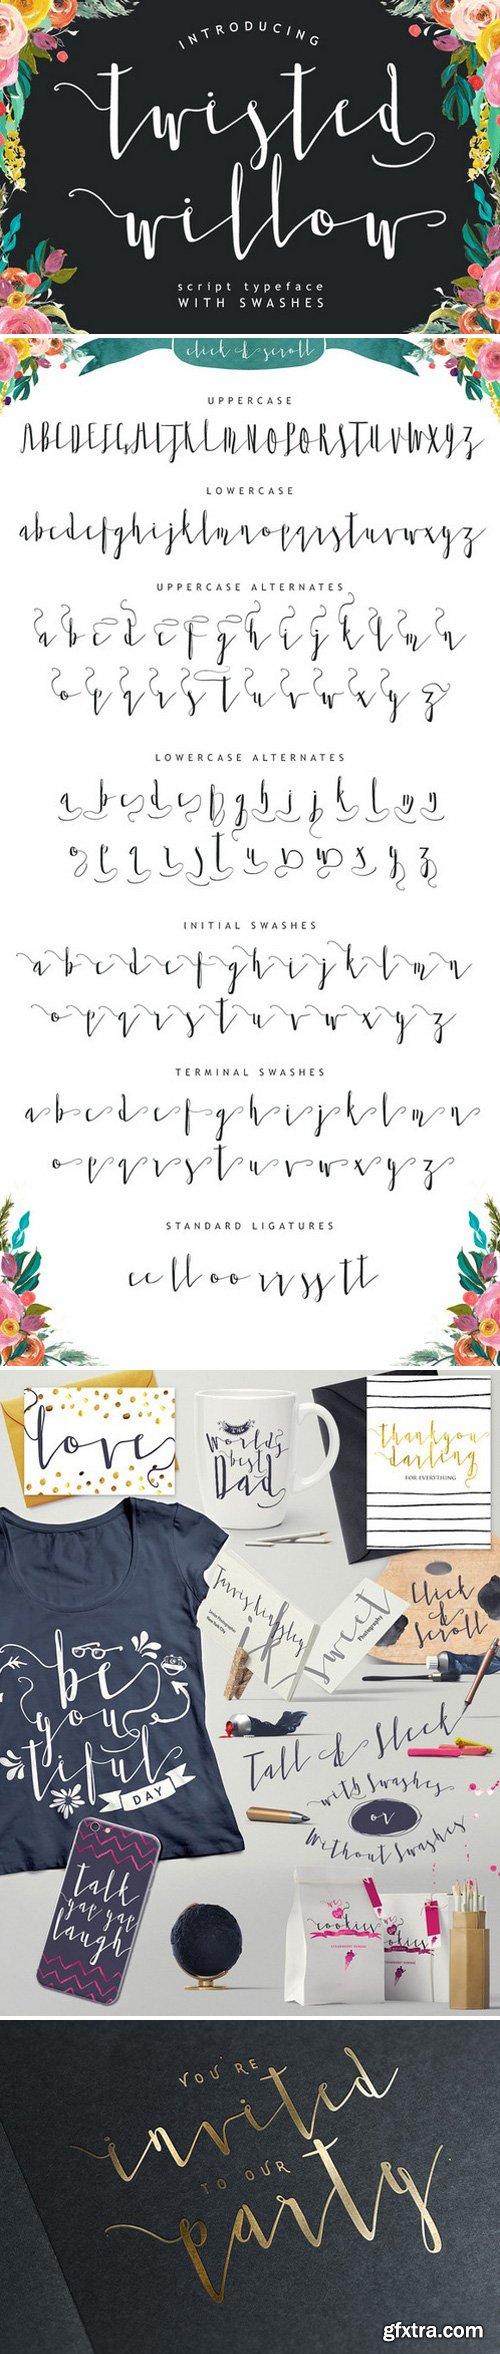 CM - Twisted Willow Typeface Font 352279